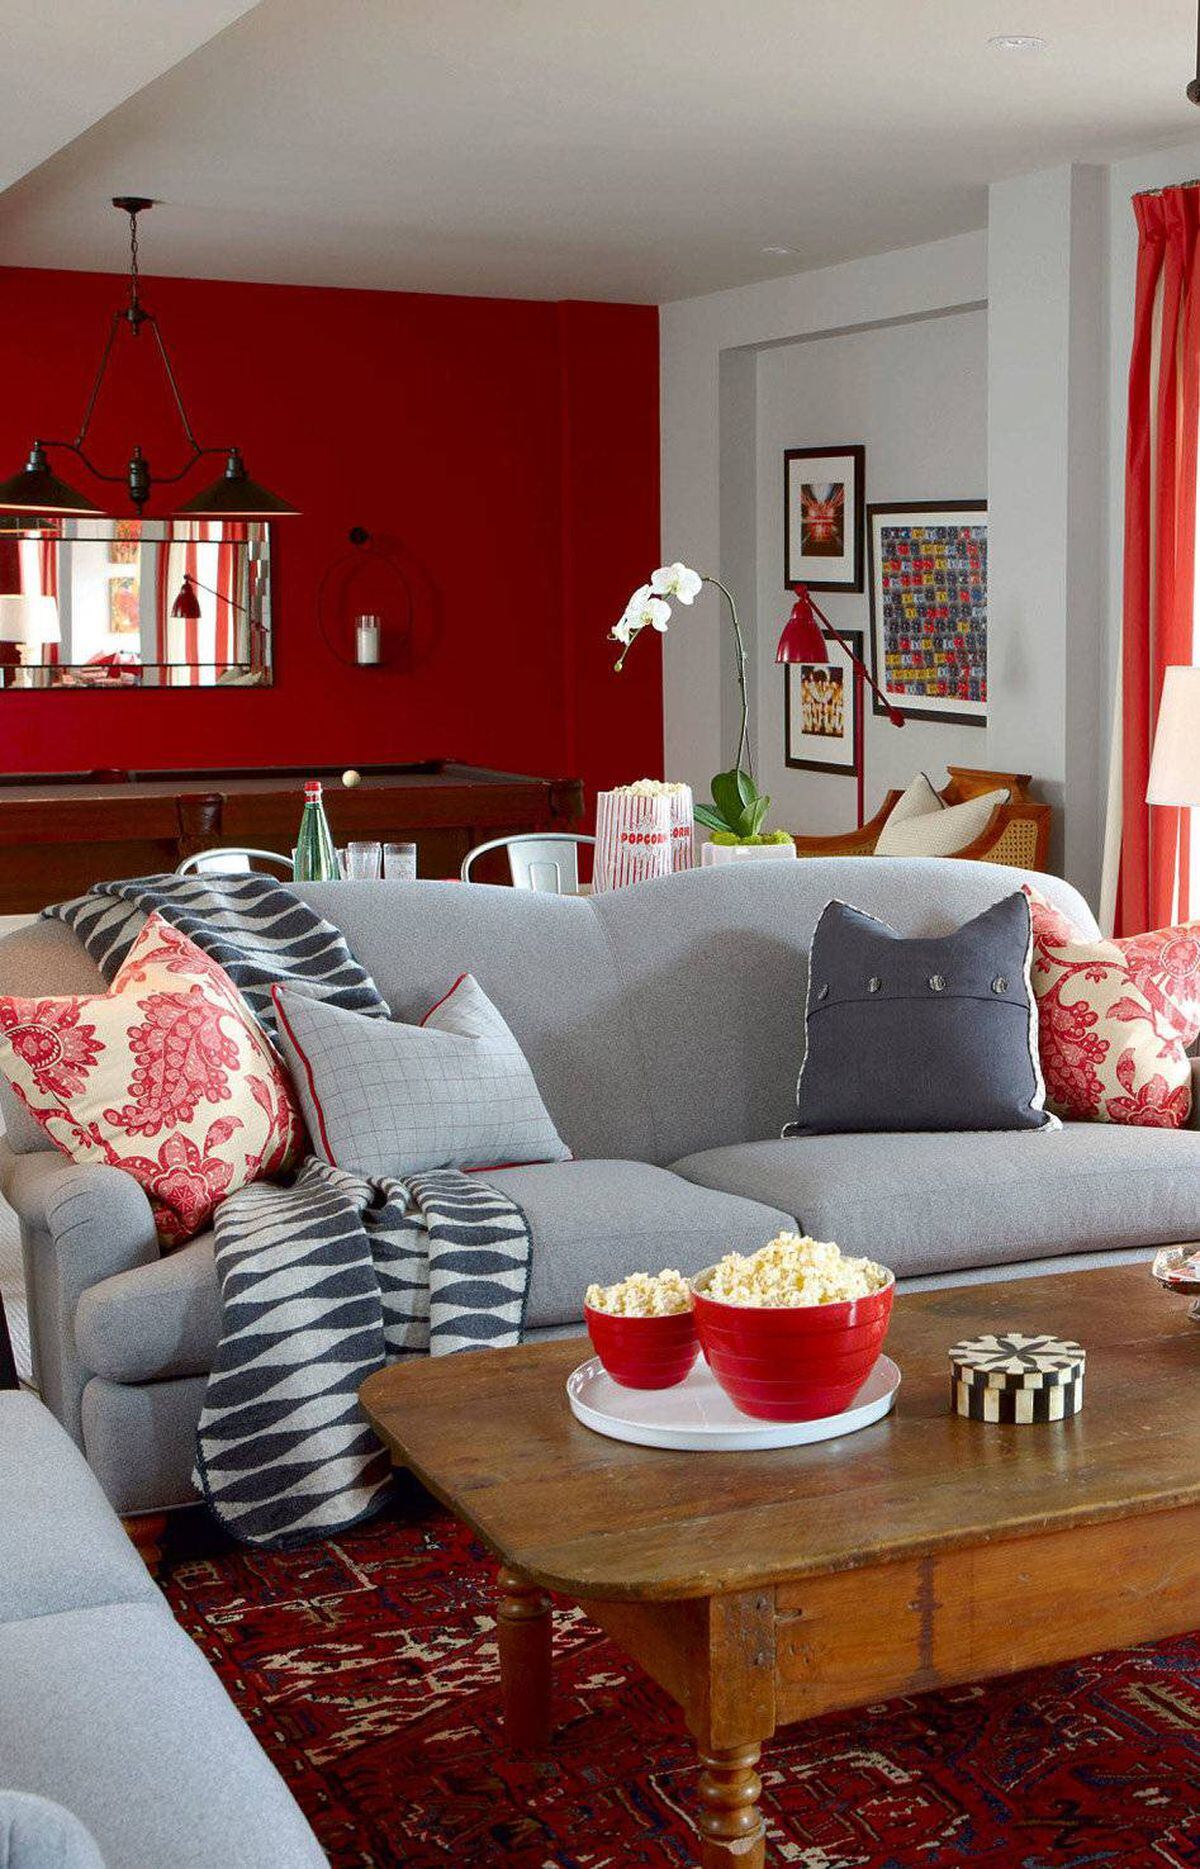 Get Living Room Red Accent Wall Images